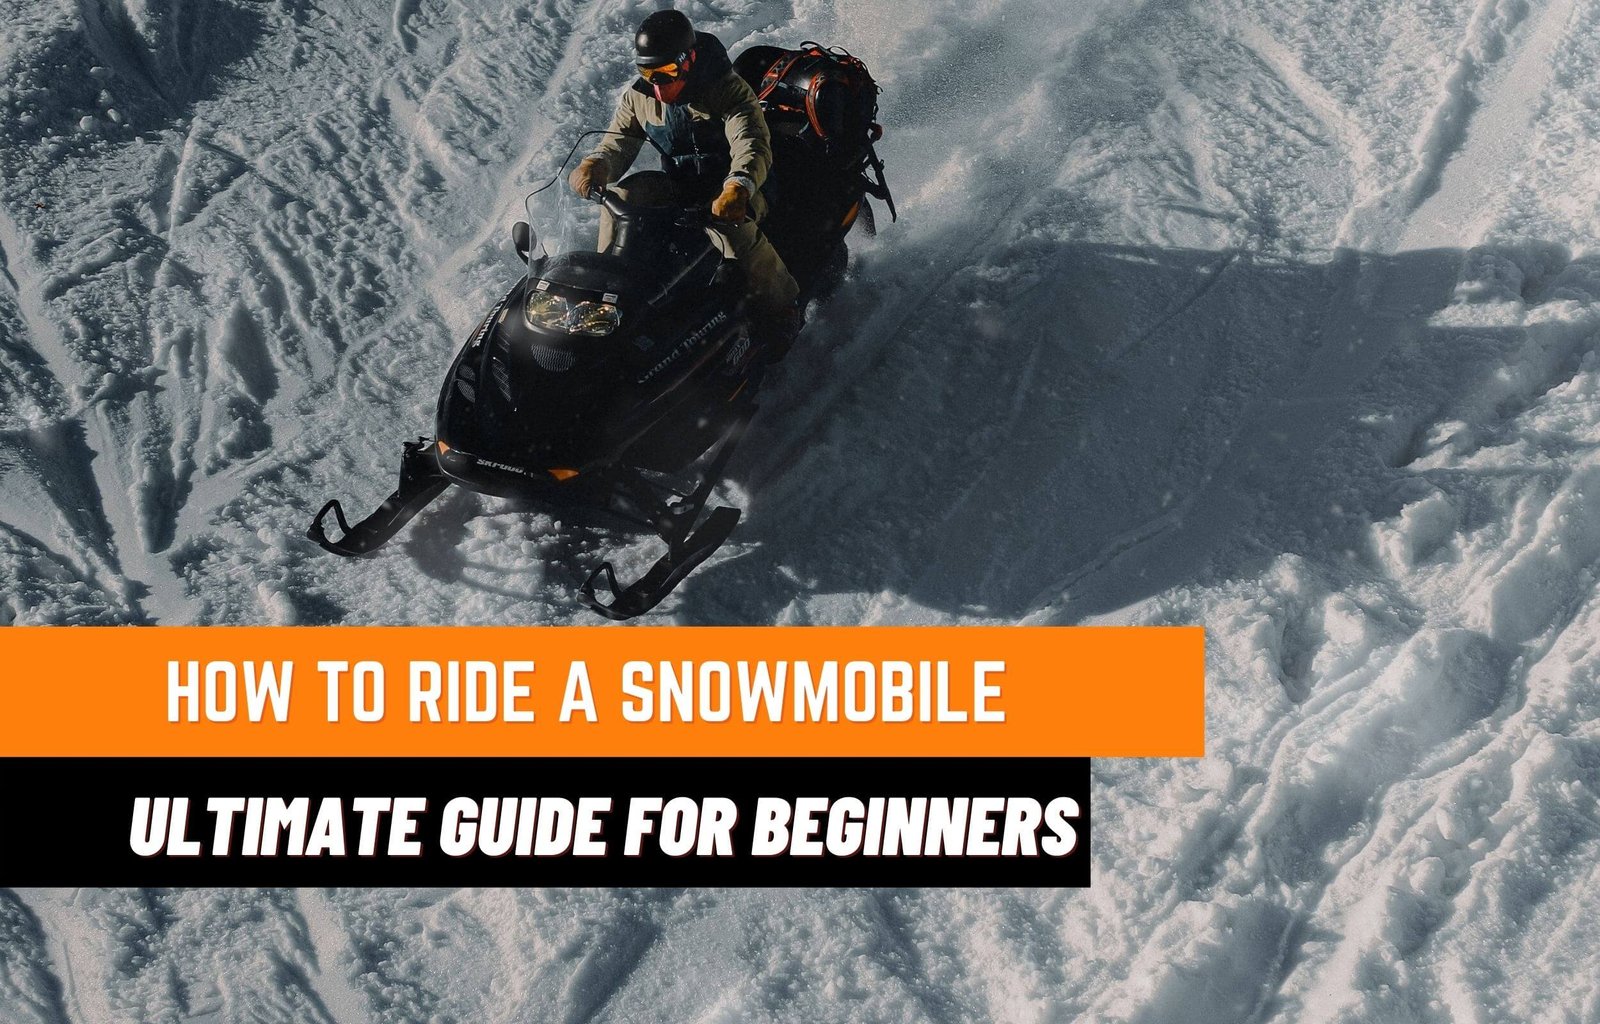 How to Ride a Snowmobile